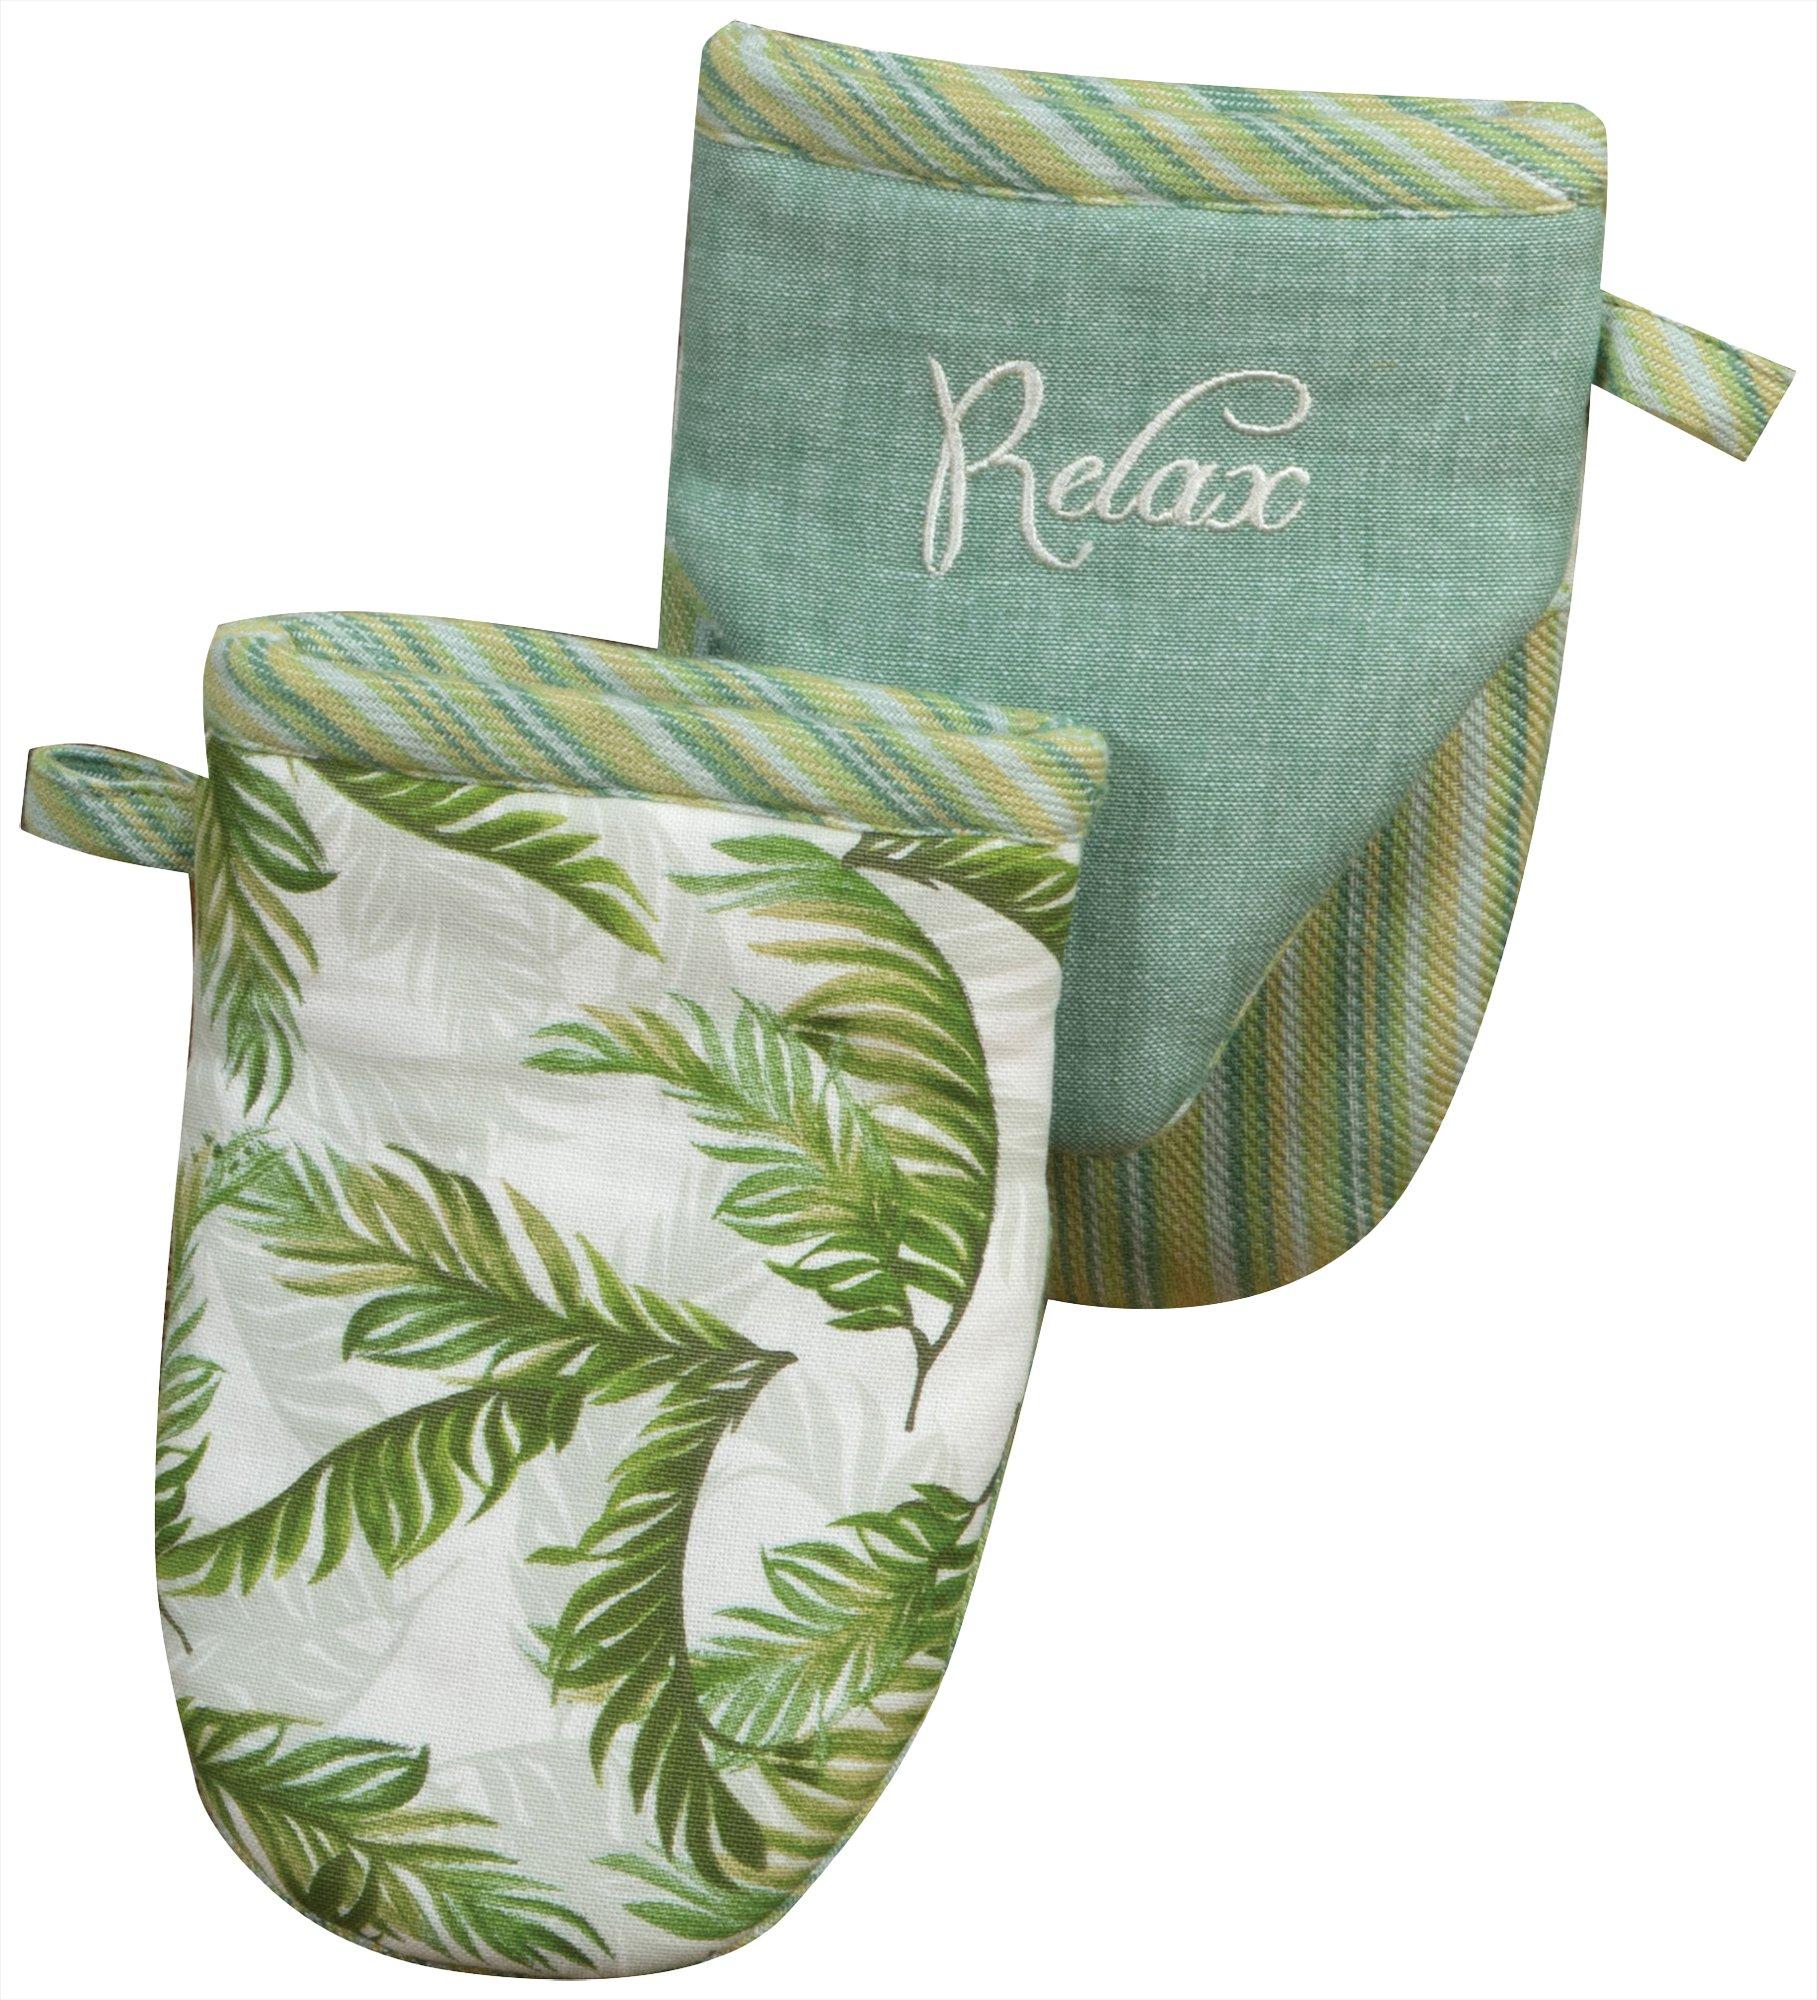 Kay Dee Designs Relax Palm Cove Embroidered Mini Oven Mitt